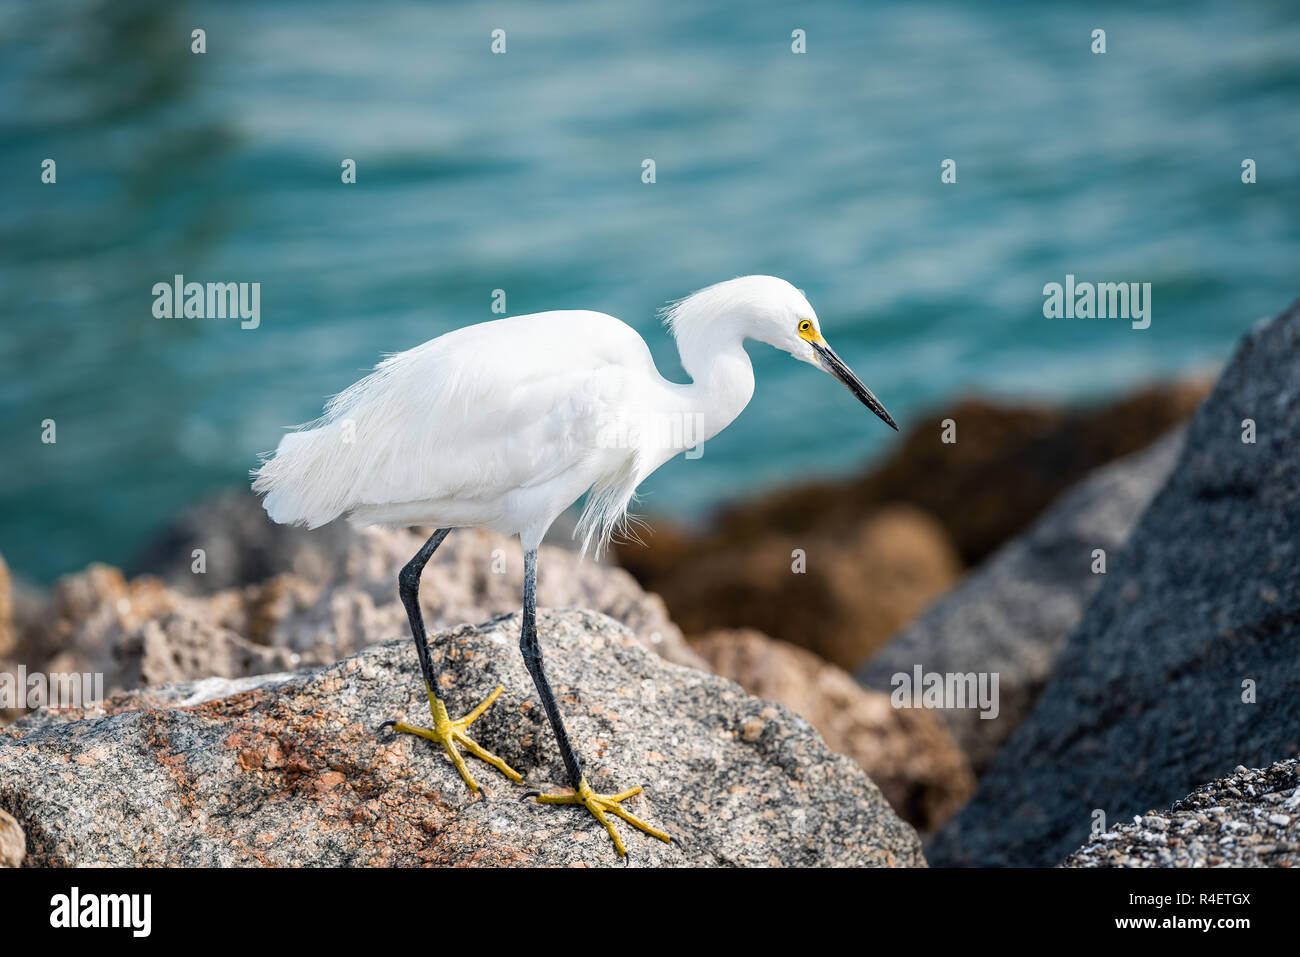 Closeup of one snowy egret white bird walking on rocky pier rocks in Florida Gulf of Mexico in Venice beach, yellow and blue colors Stock Photo